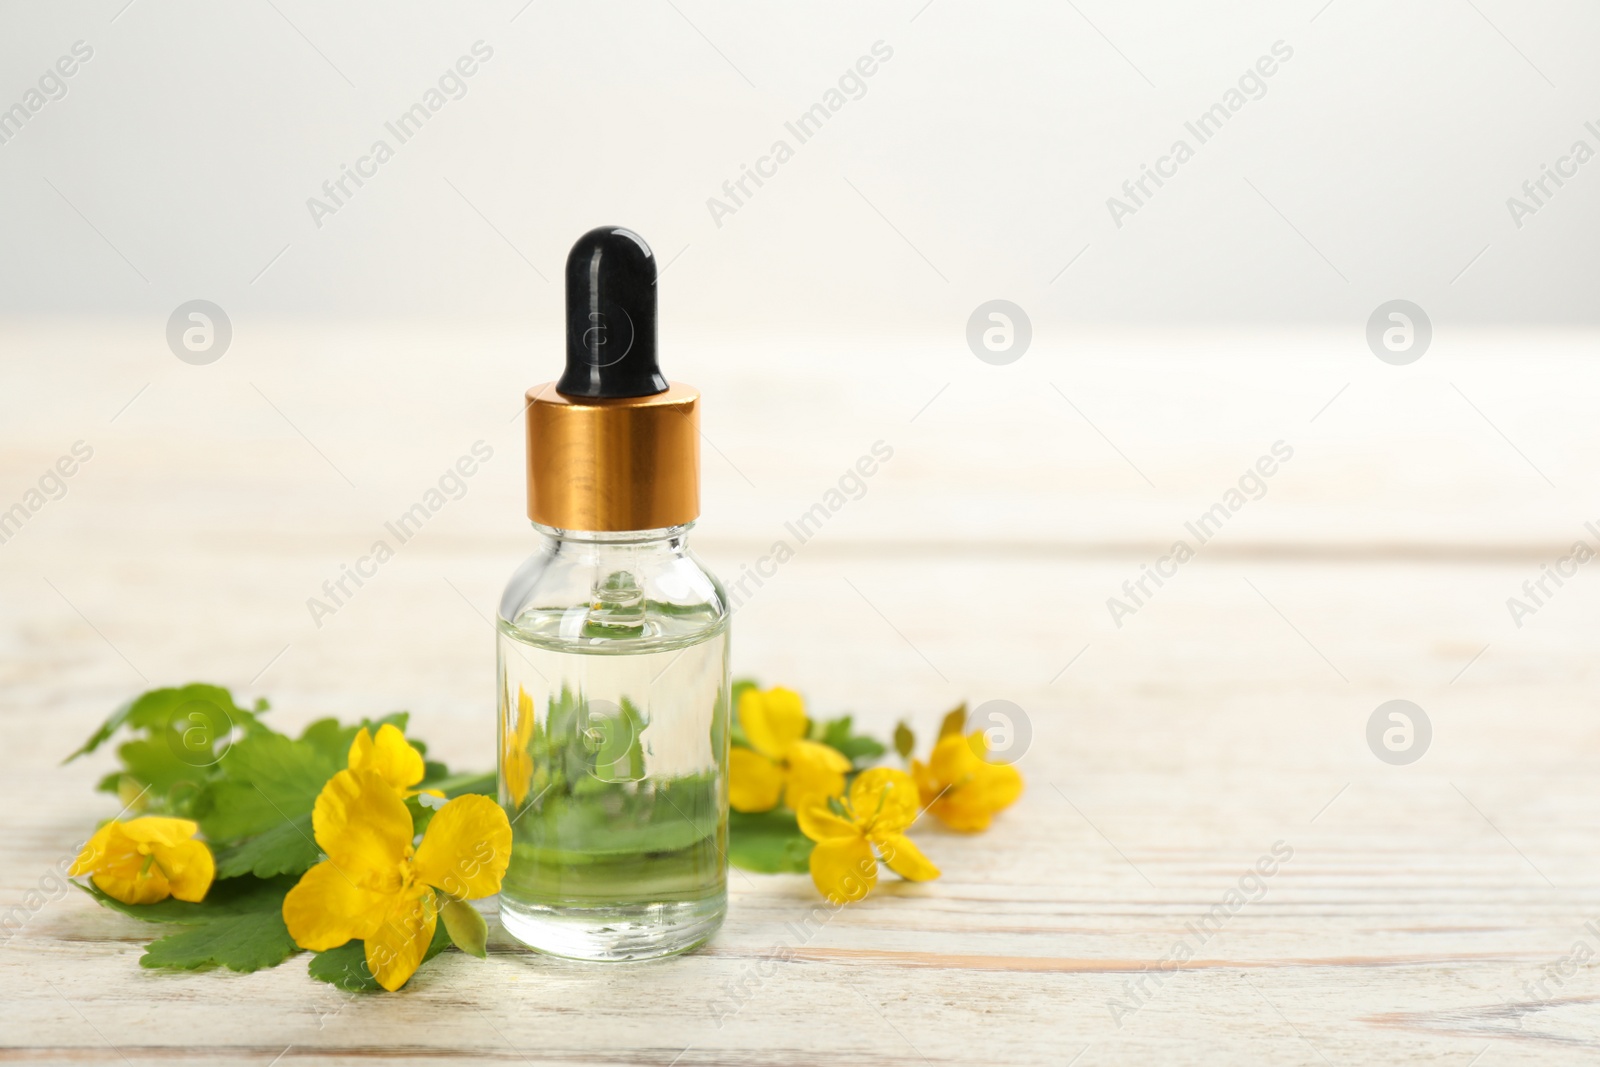 Photo of Bottle of natural celandine oil near flowers on white wooden table, space for text